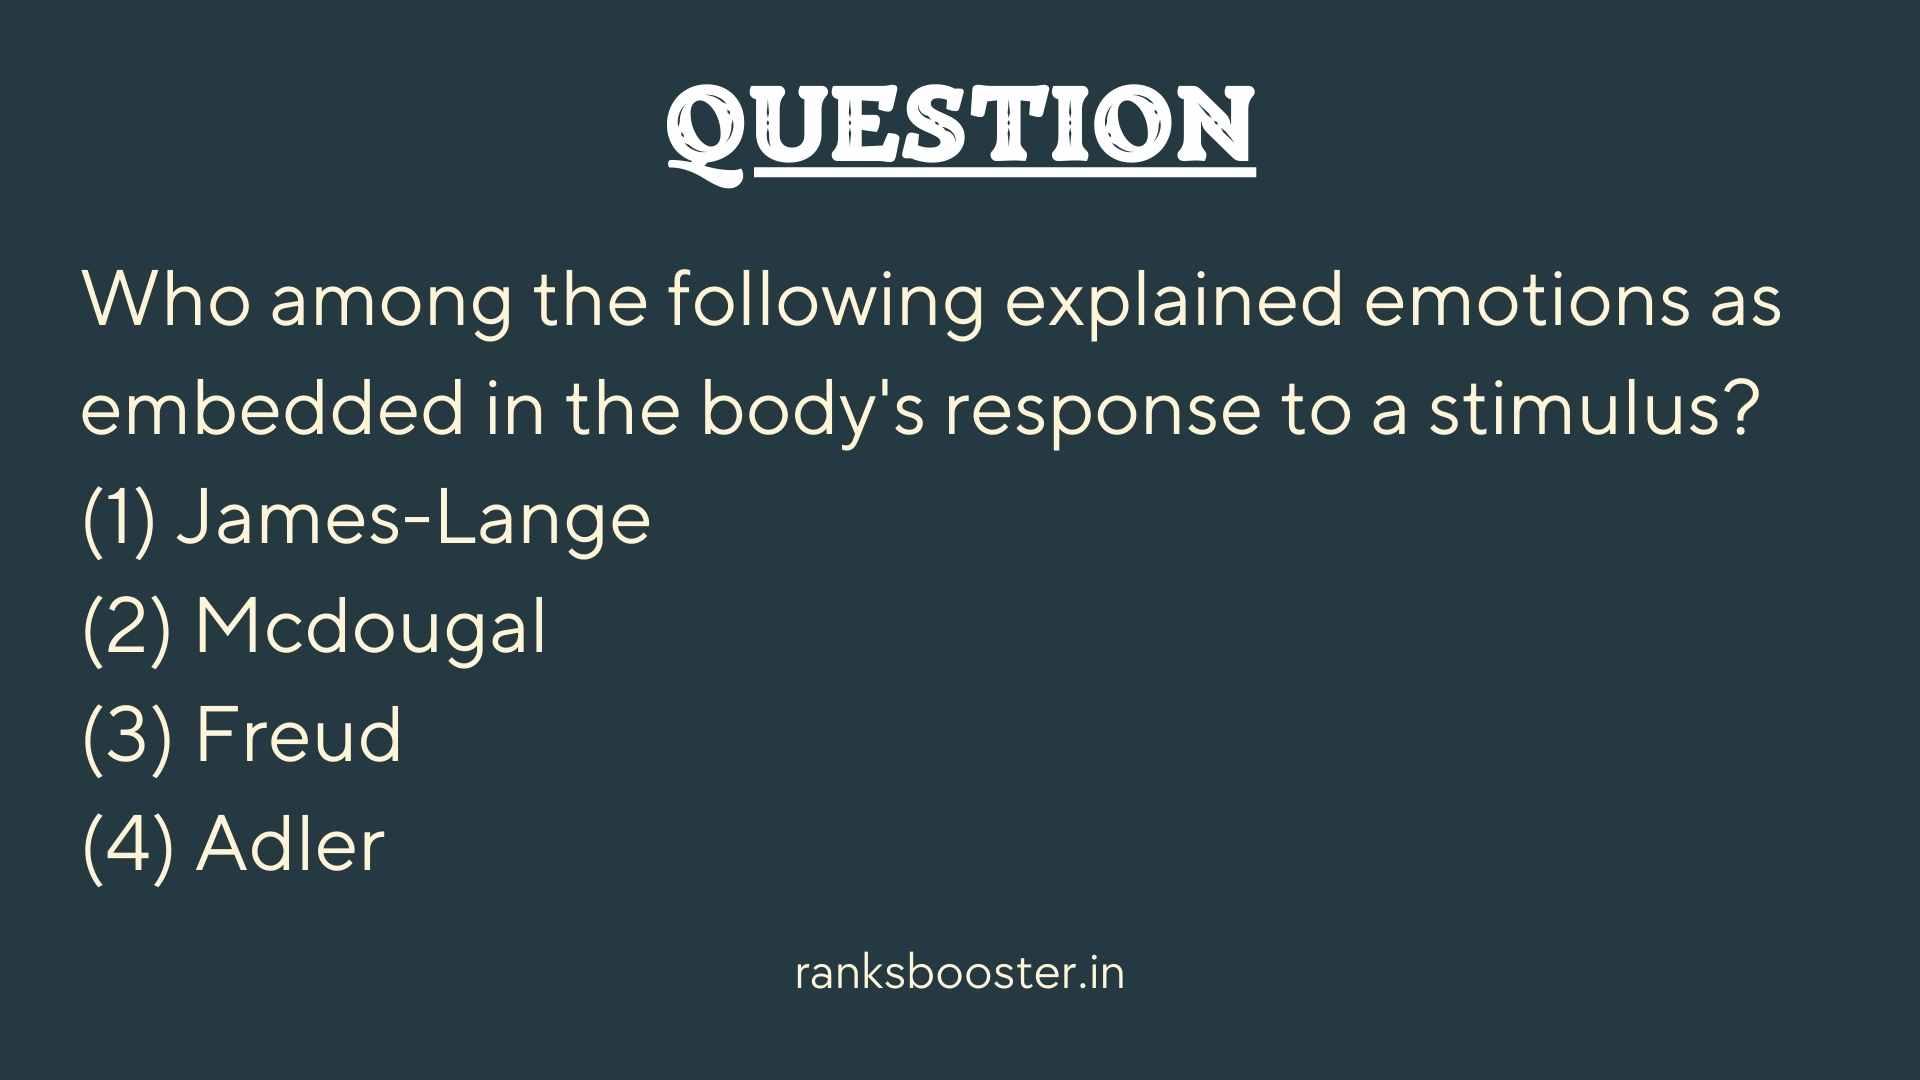 Who among the following explained emotions as embedded in the body's response to a stimulus?